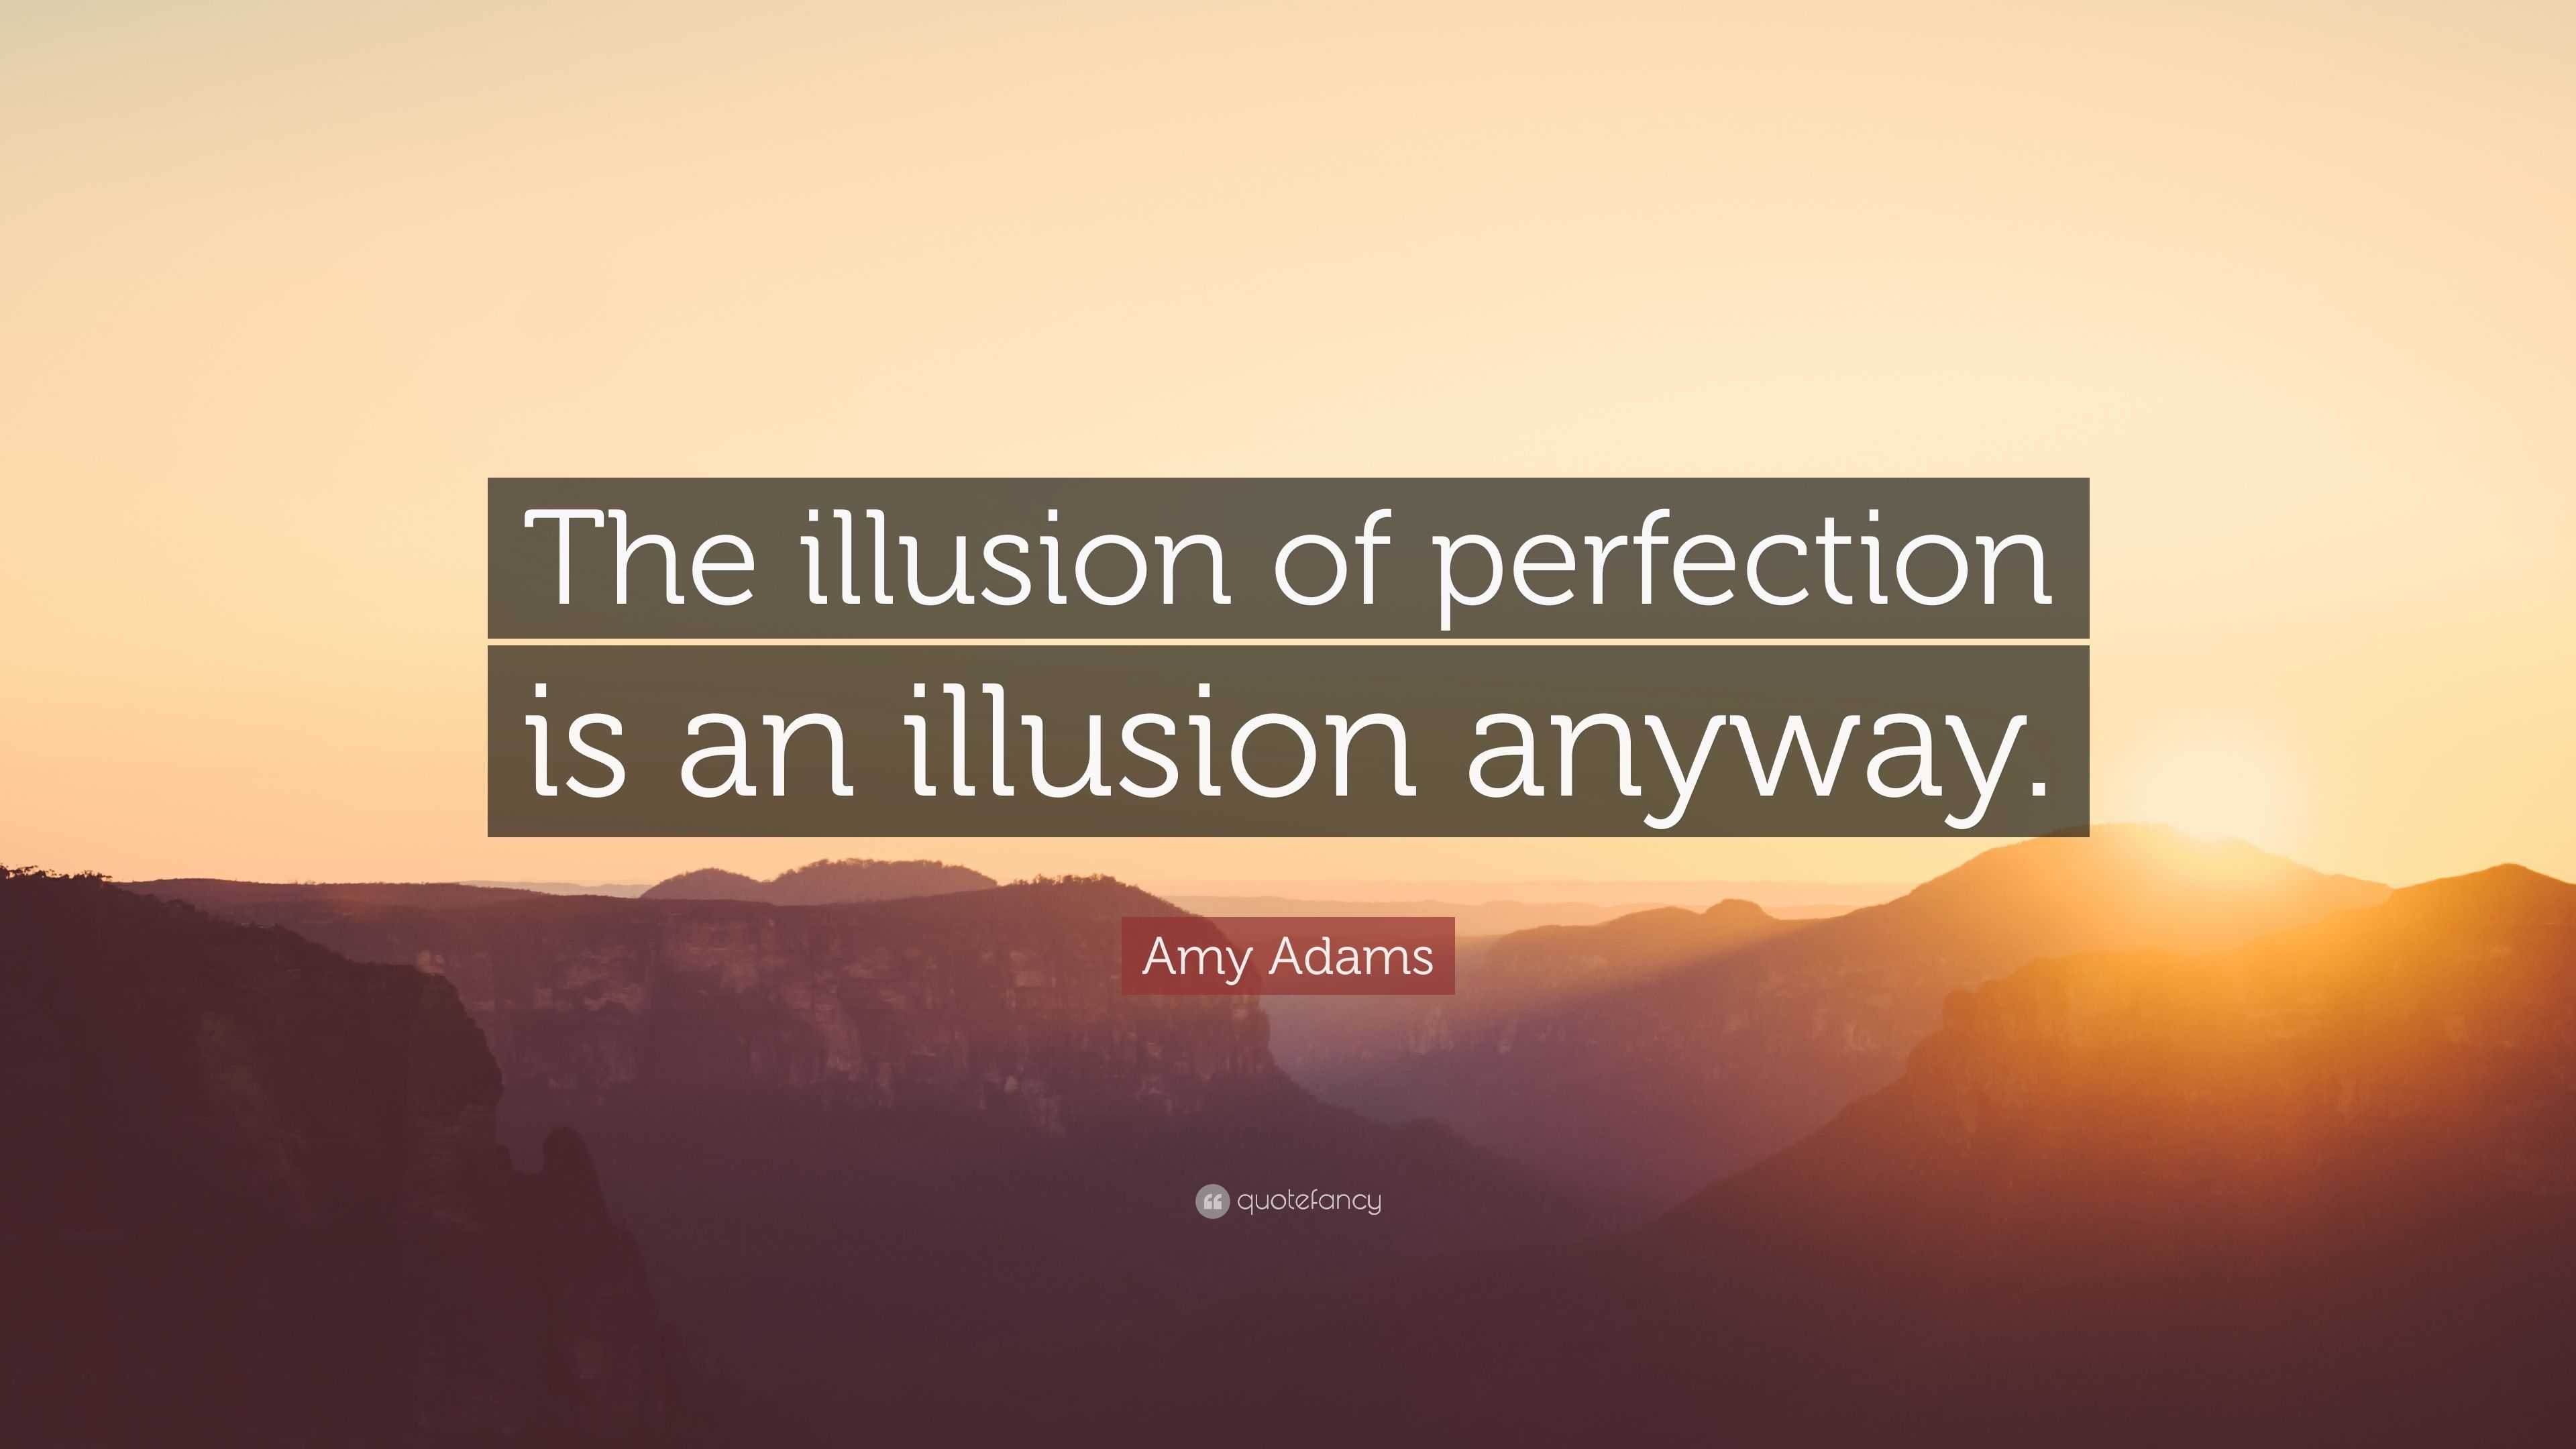 Amy Adams Quote: “The illusion of perfection is an illusion anyway.”